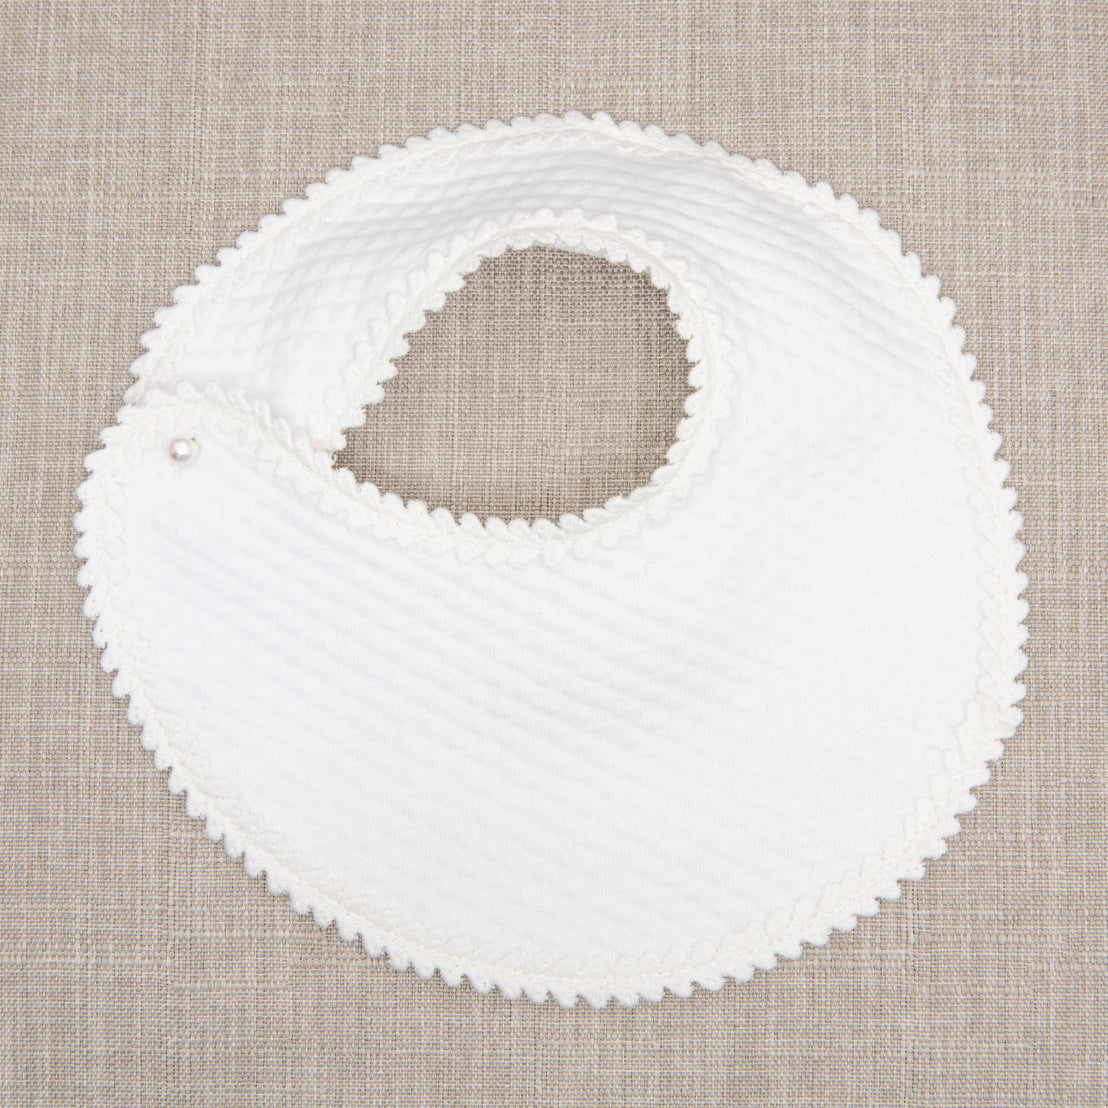 Flat lay photo of the Tessa Quilt Bib. The bib is made with a soft quilted cotton, accented with a floral edge lace, and features a pearl style button closure. 